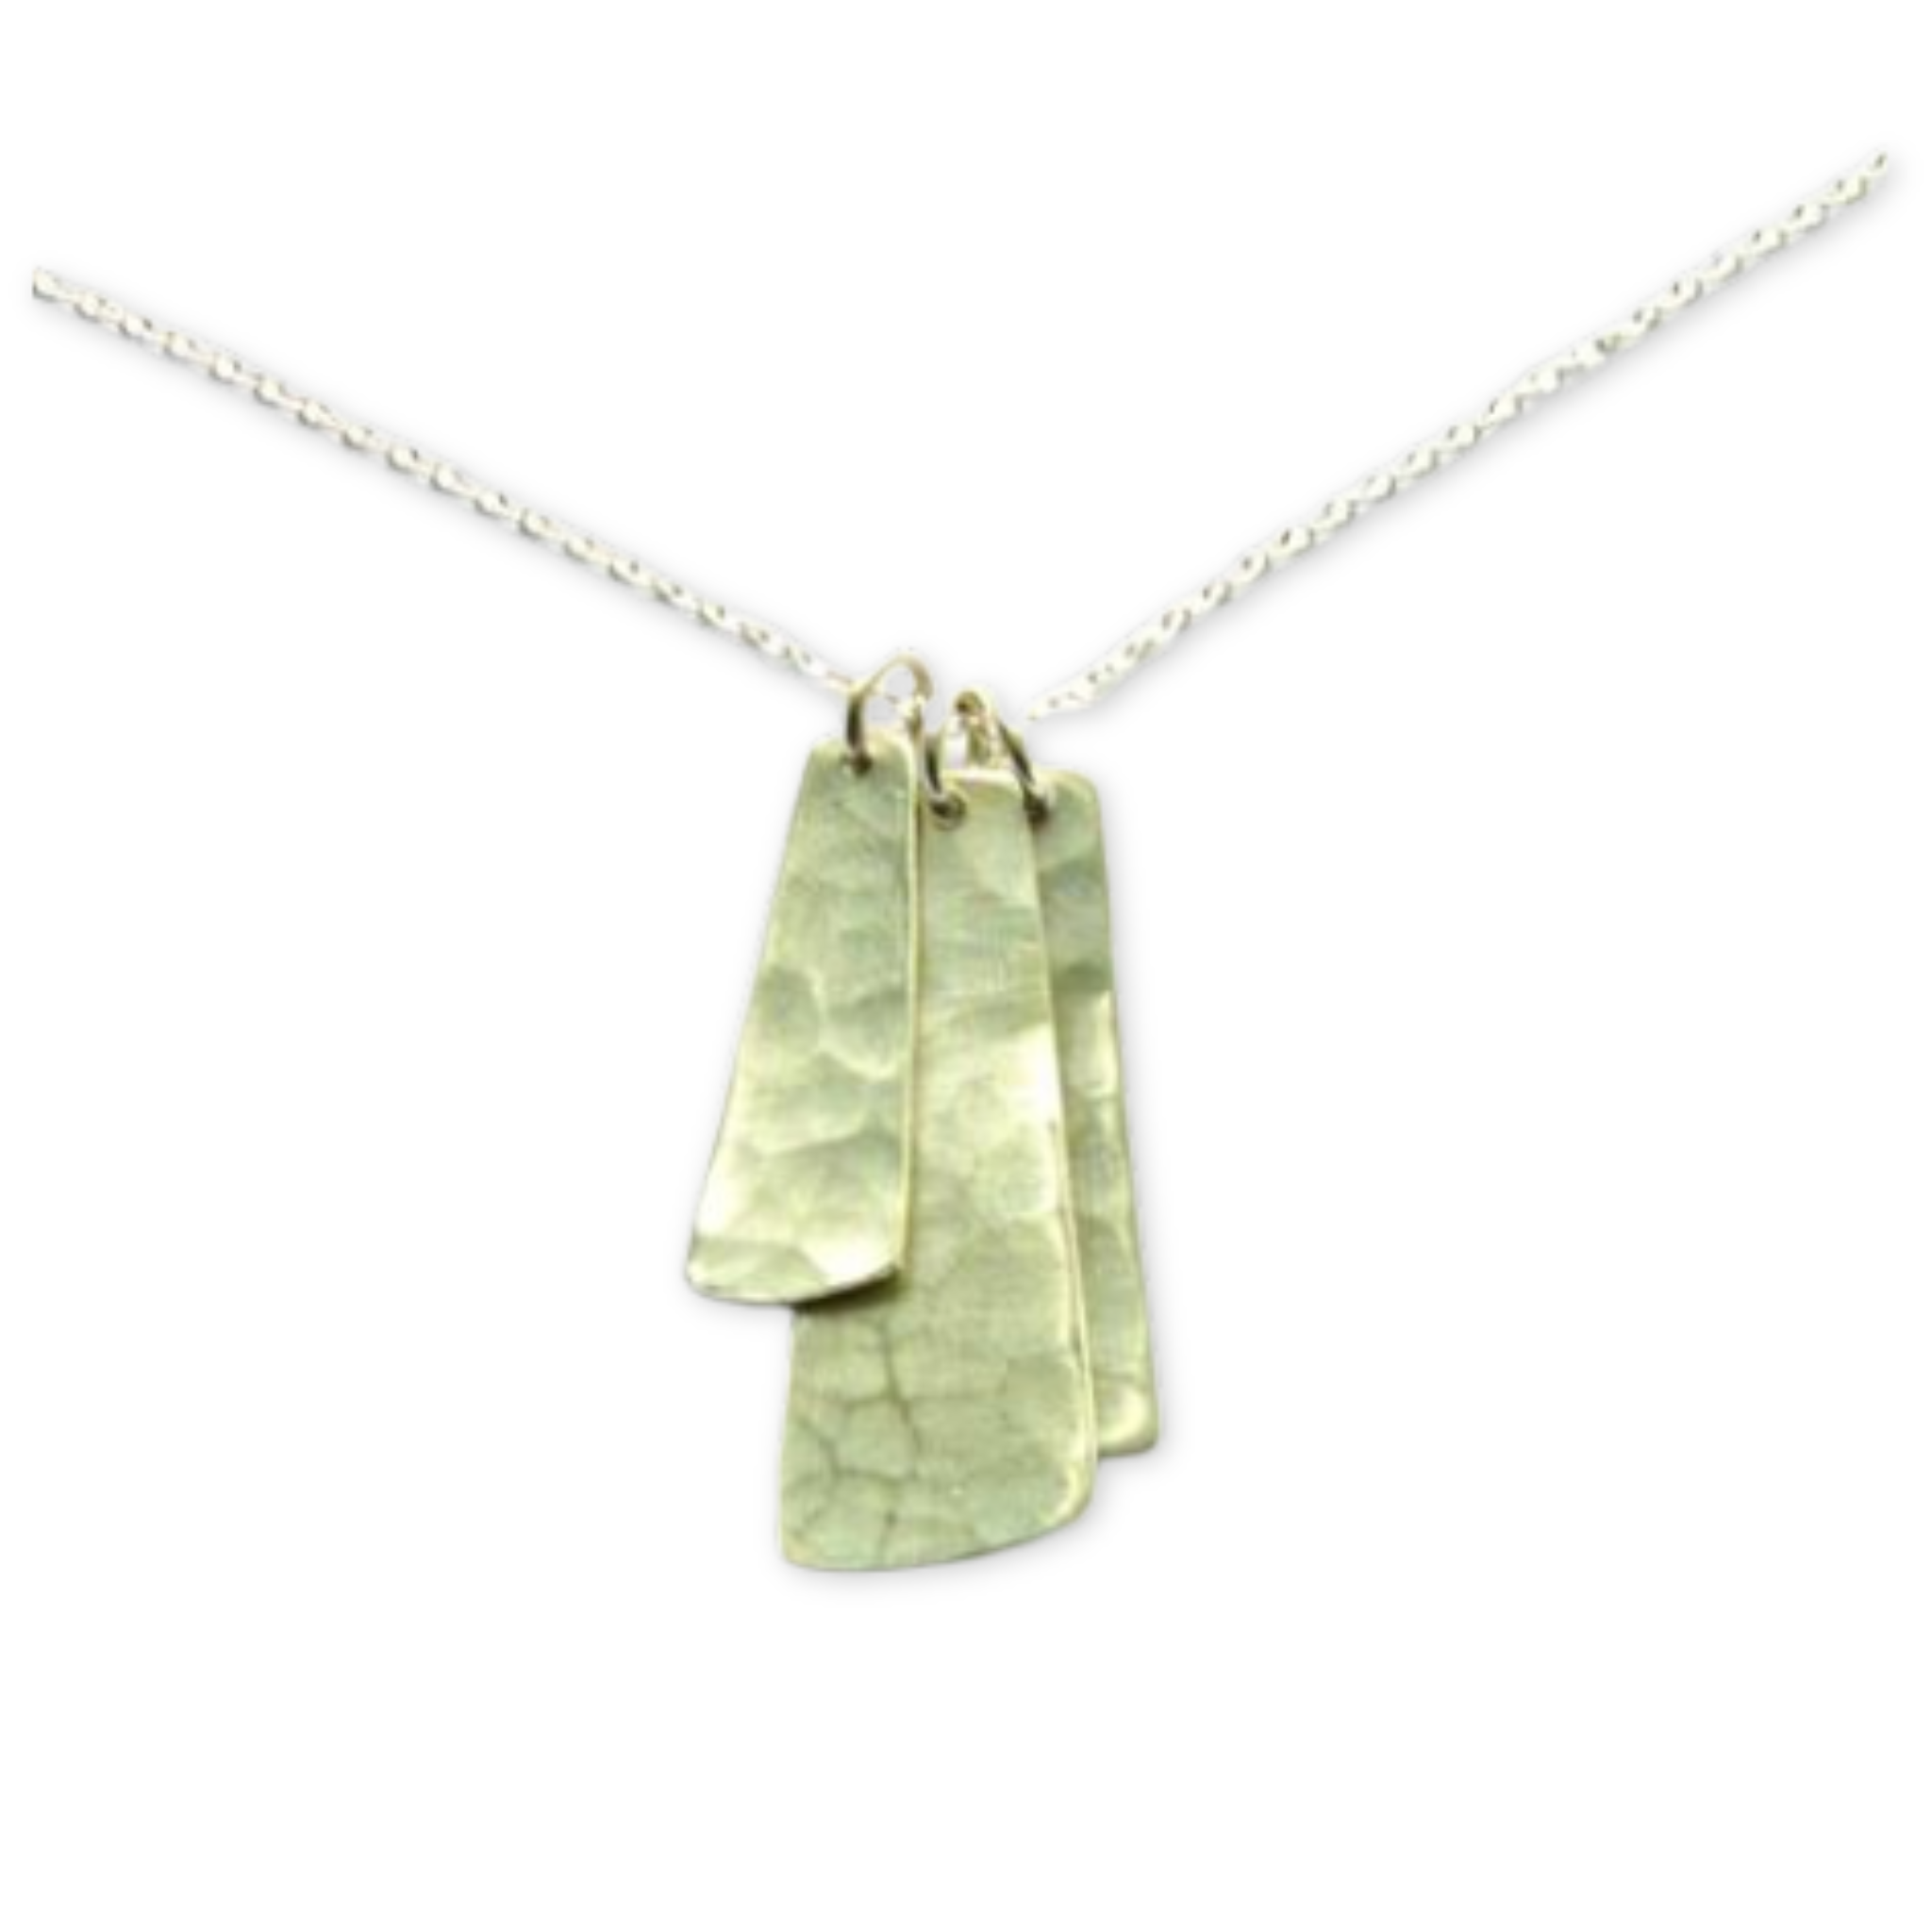 three organic shaped hammered charms hanging from a thin necklace chain